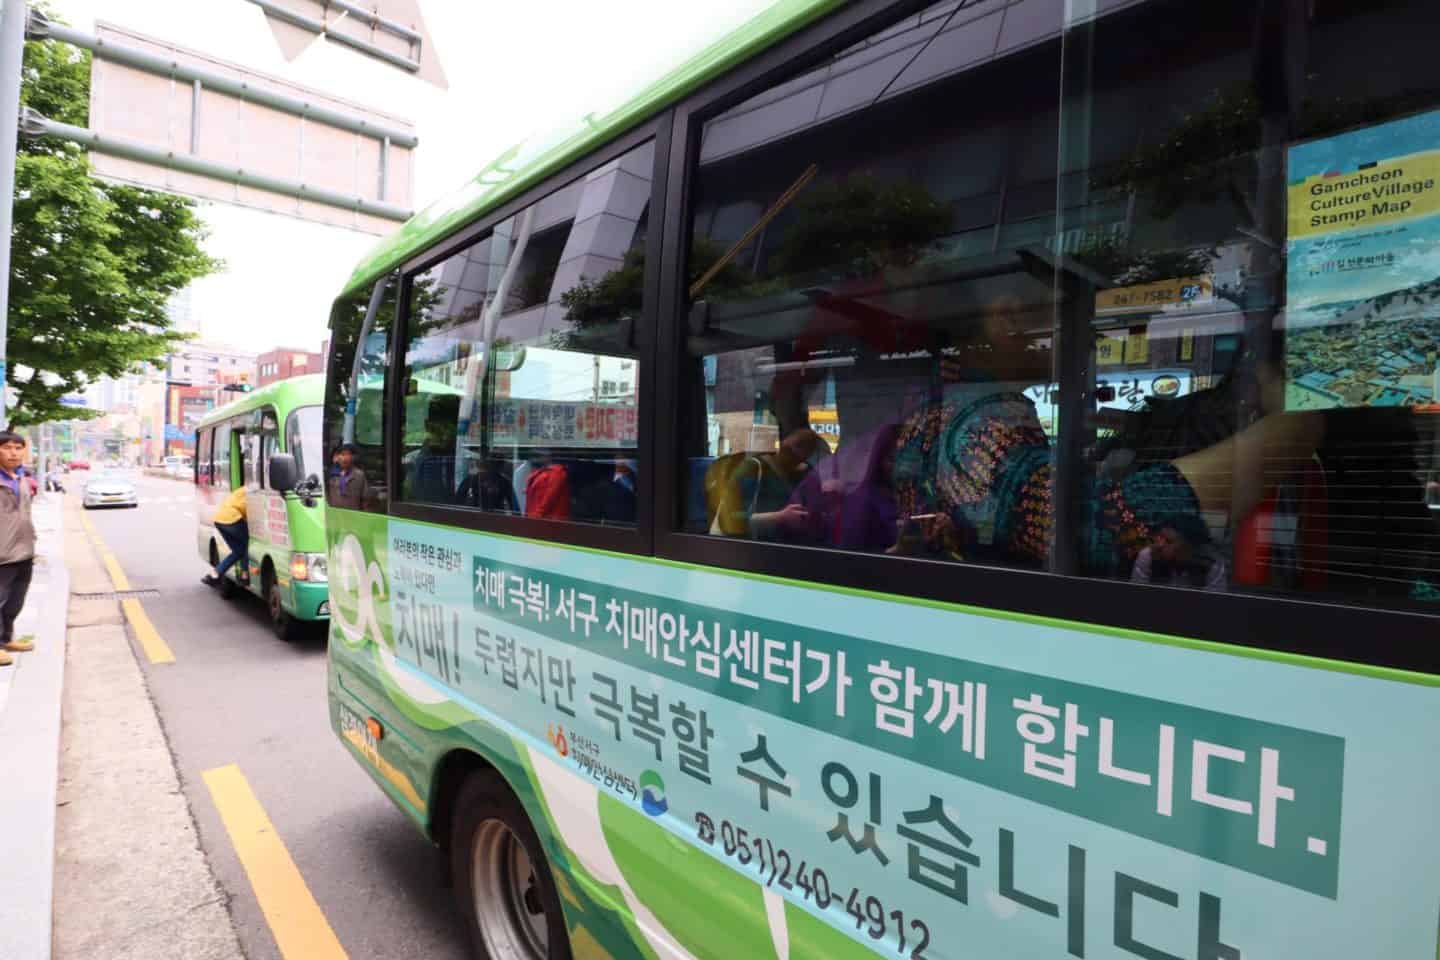 bus for Gamcheon Culture Village in Busan